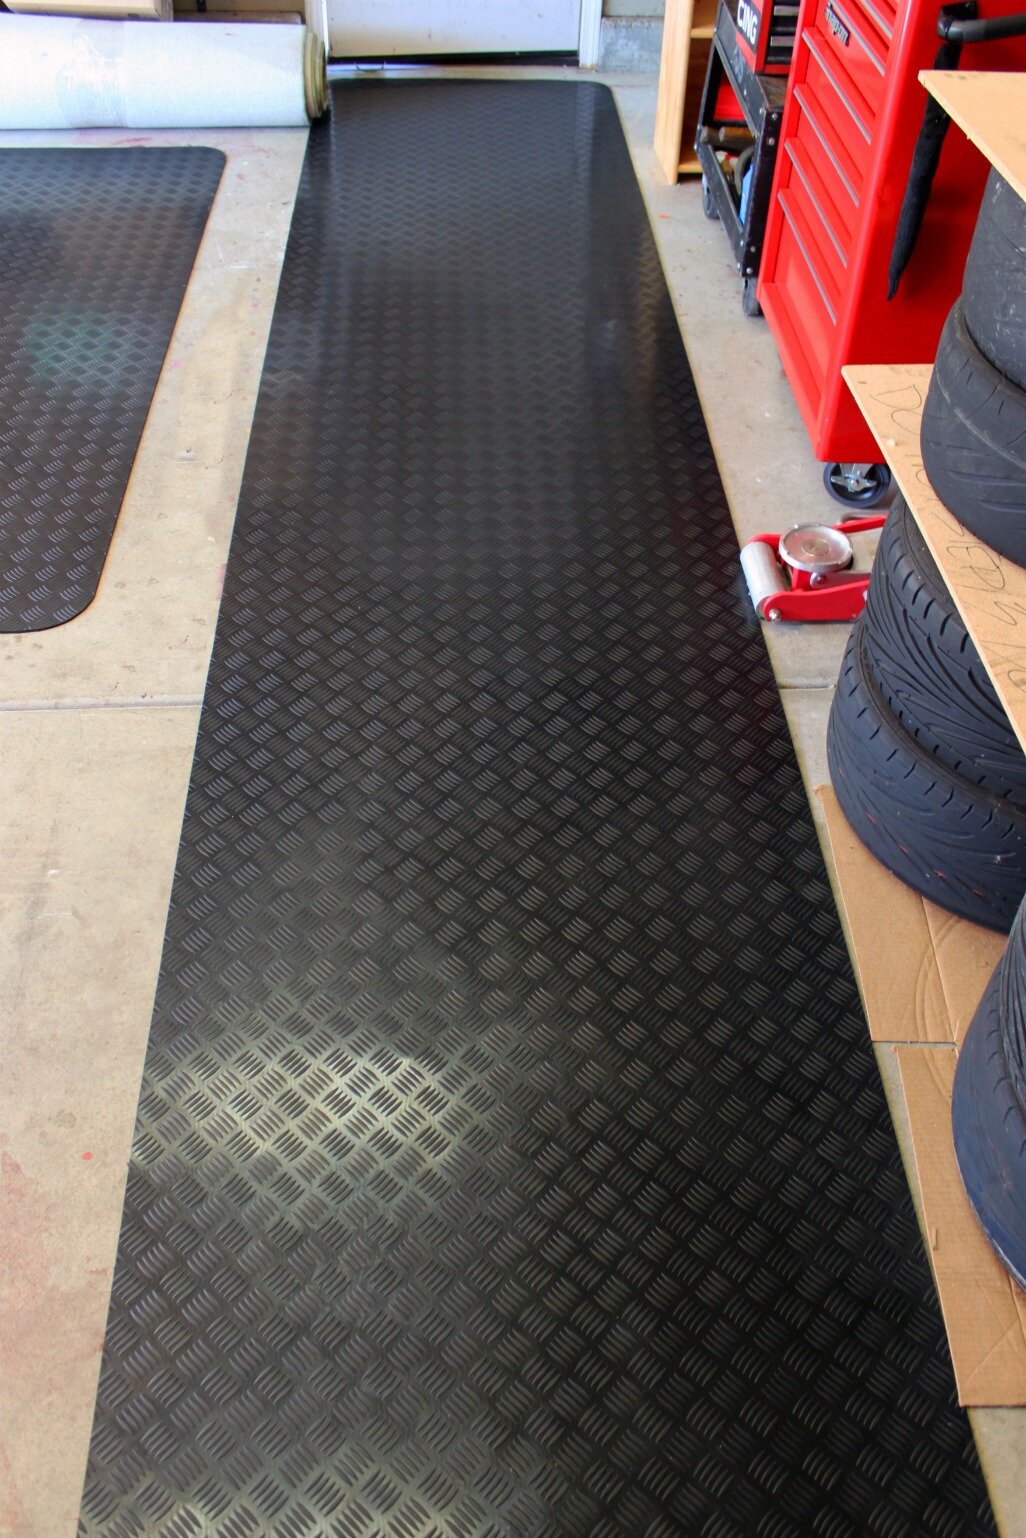 Corrugated Composite Rib Rubber Runner Mats Rubber Flooring Experts